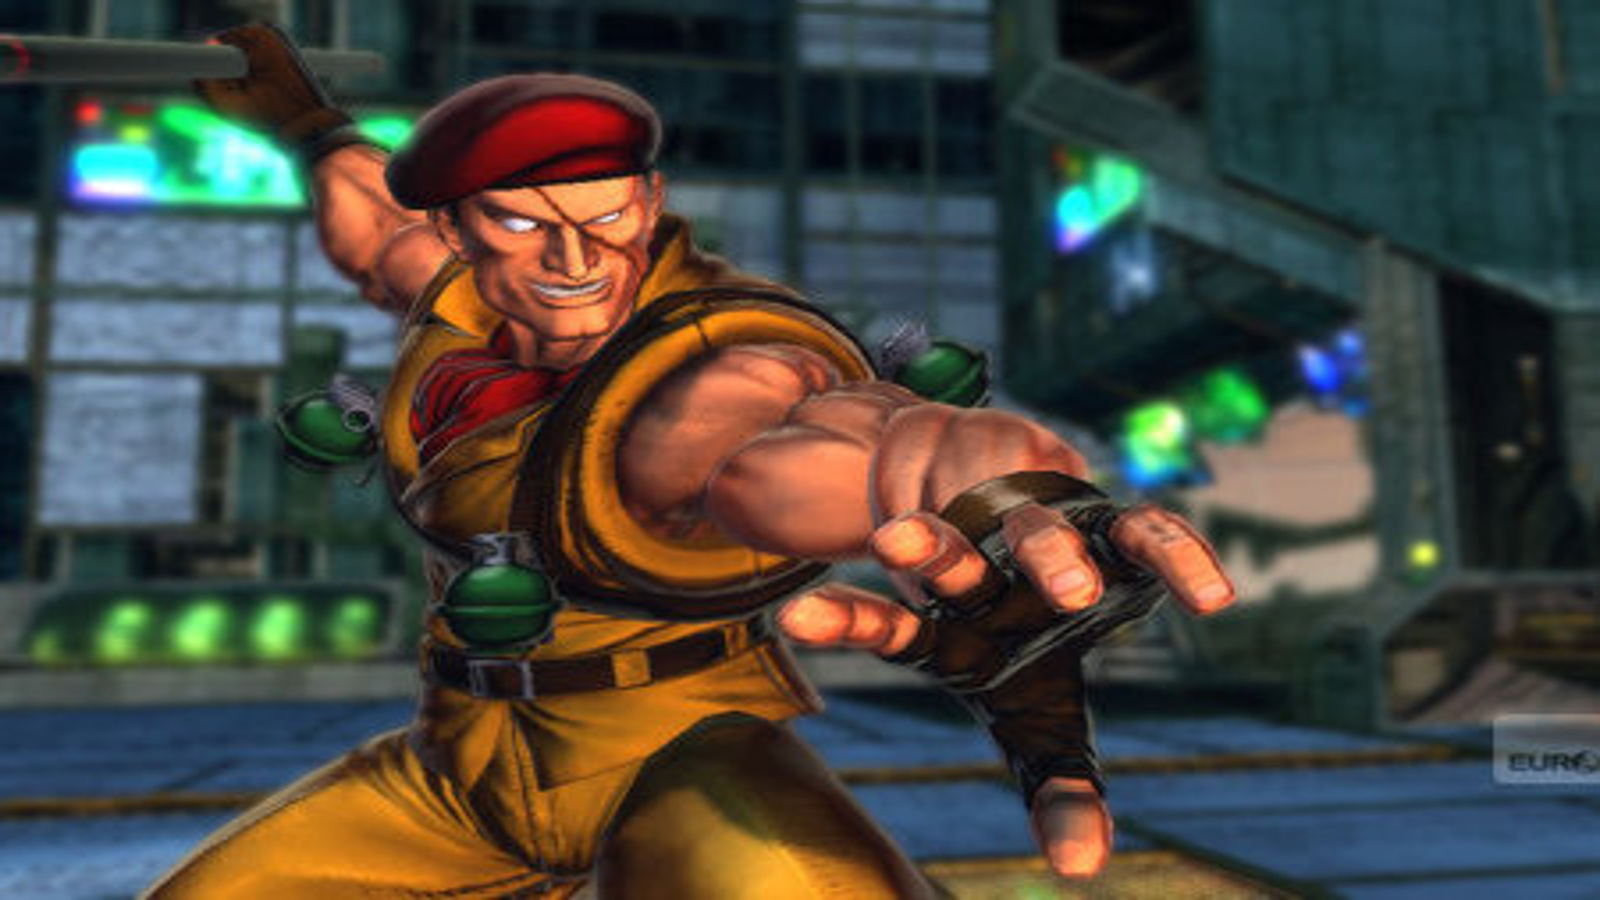 Super Street Fighter IV Arcade Edition Steam Key for PC - Buy now